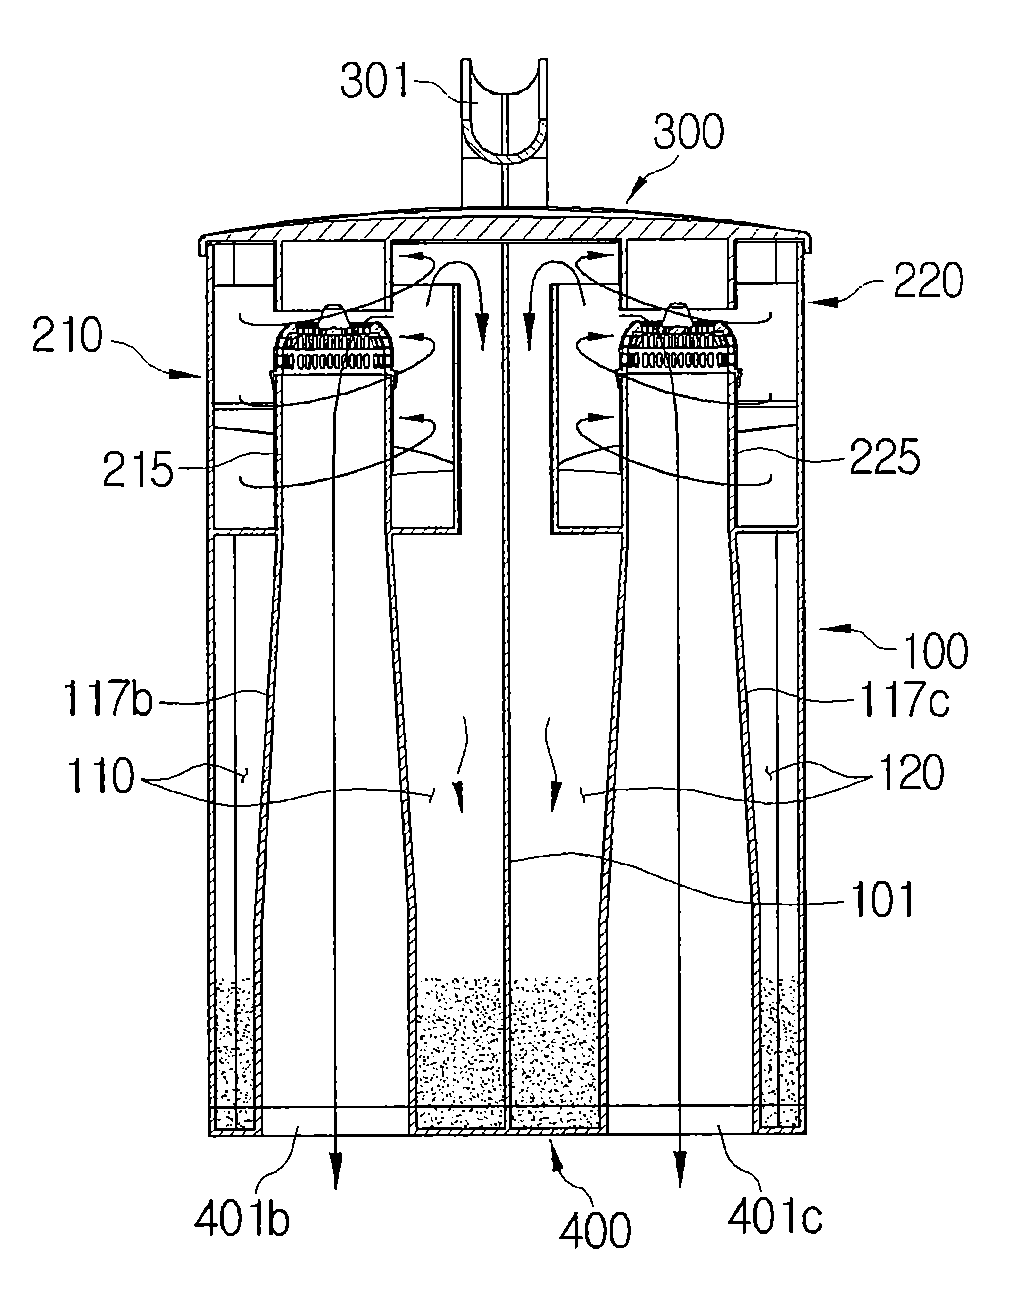 Cyclone dust-collecting apparatus for vacuum cleaner